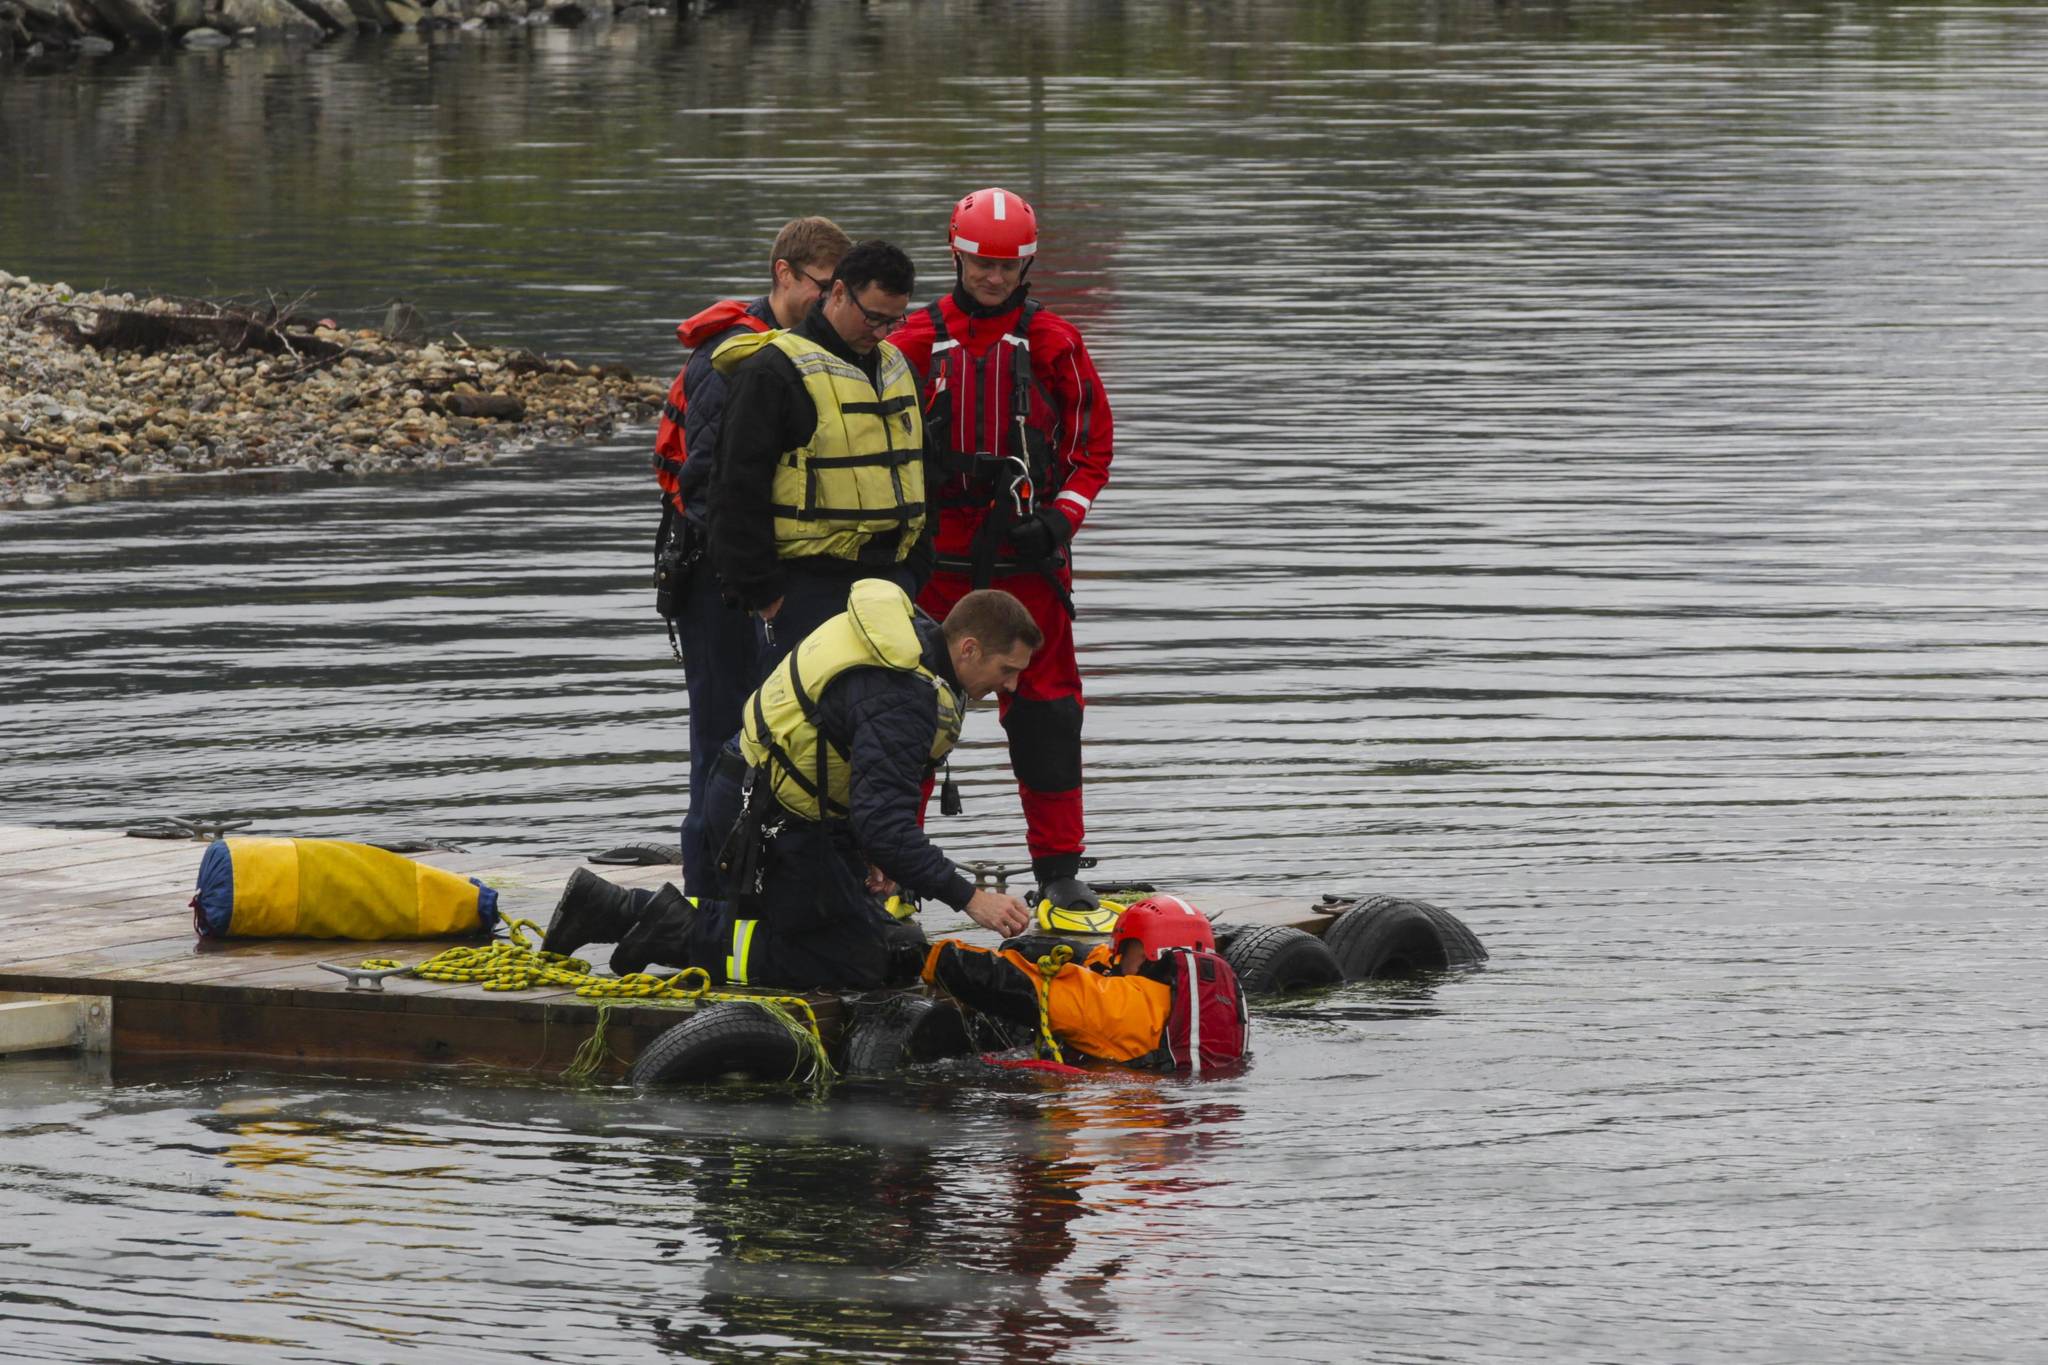 Capital City Fire/Rescue personnel underwent water rescue training at the floatplane pond at Juneau International Airport on June 21, 2021. (Michael S. Lockett / Juneau Empire)